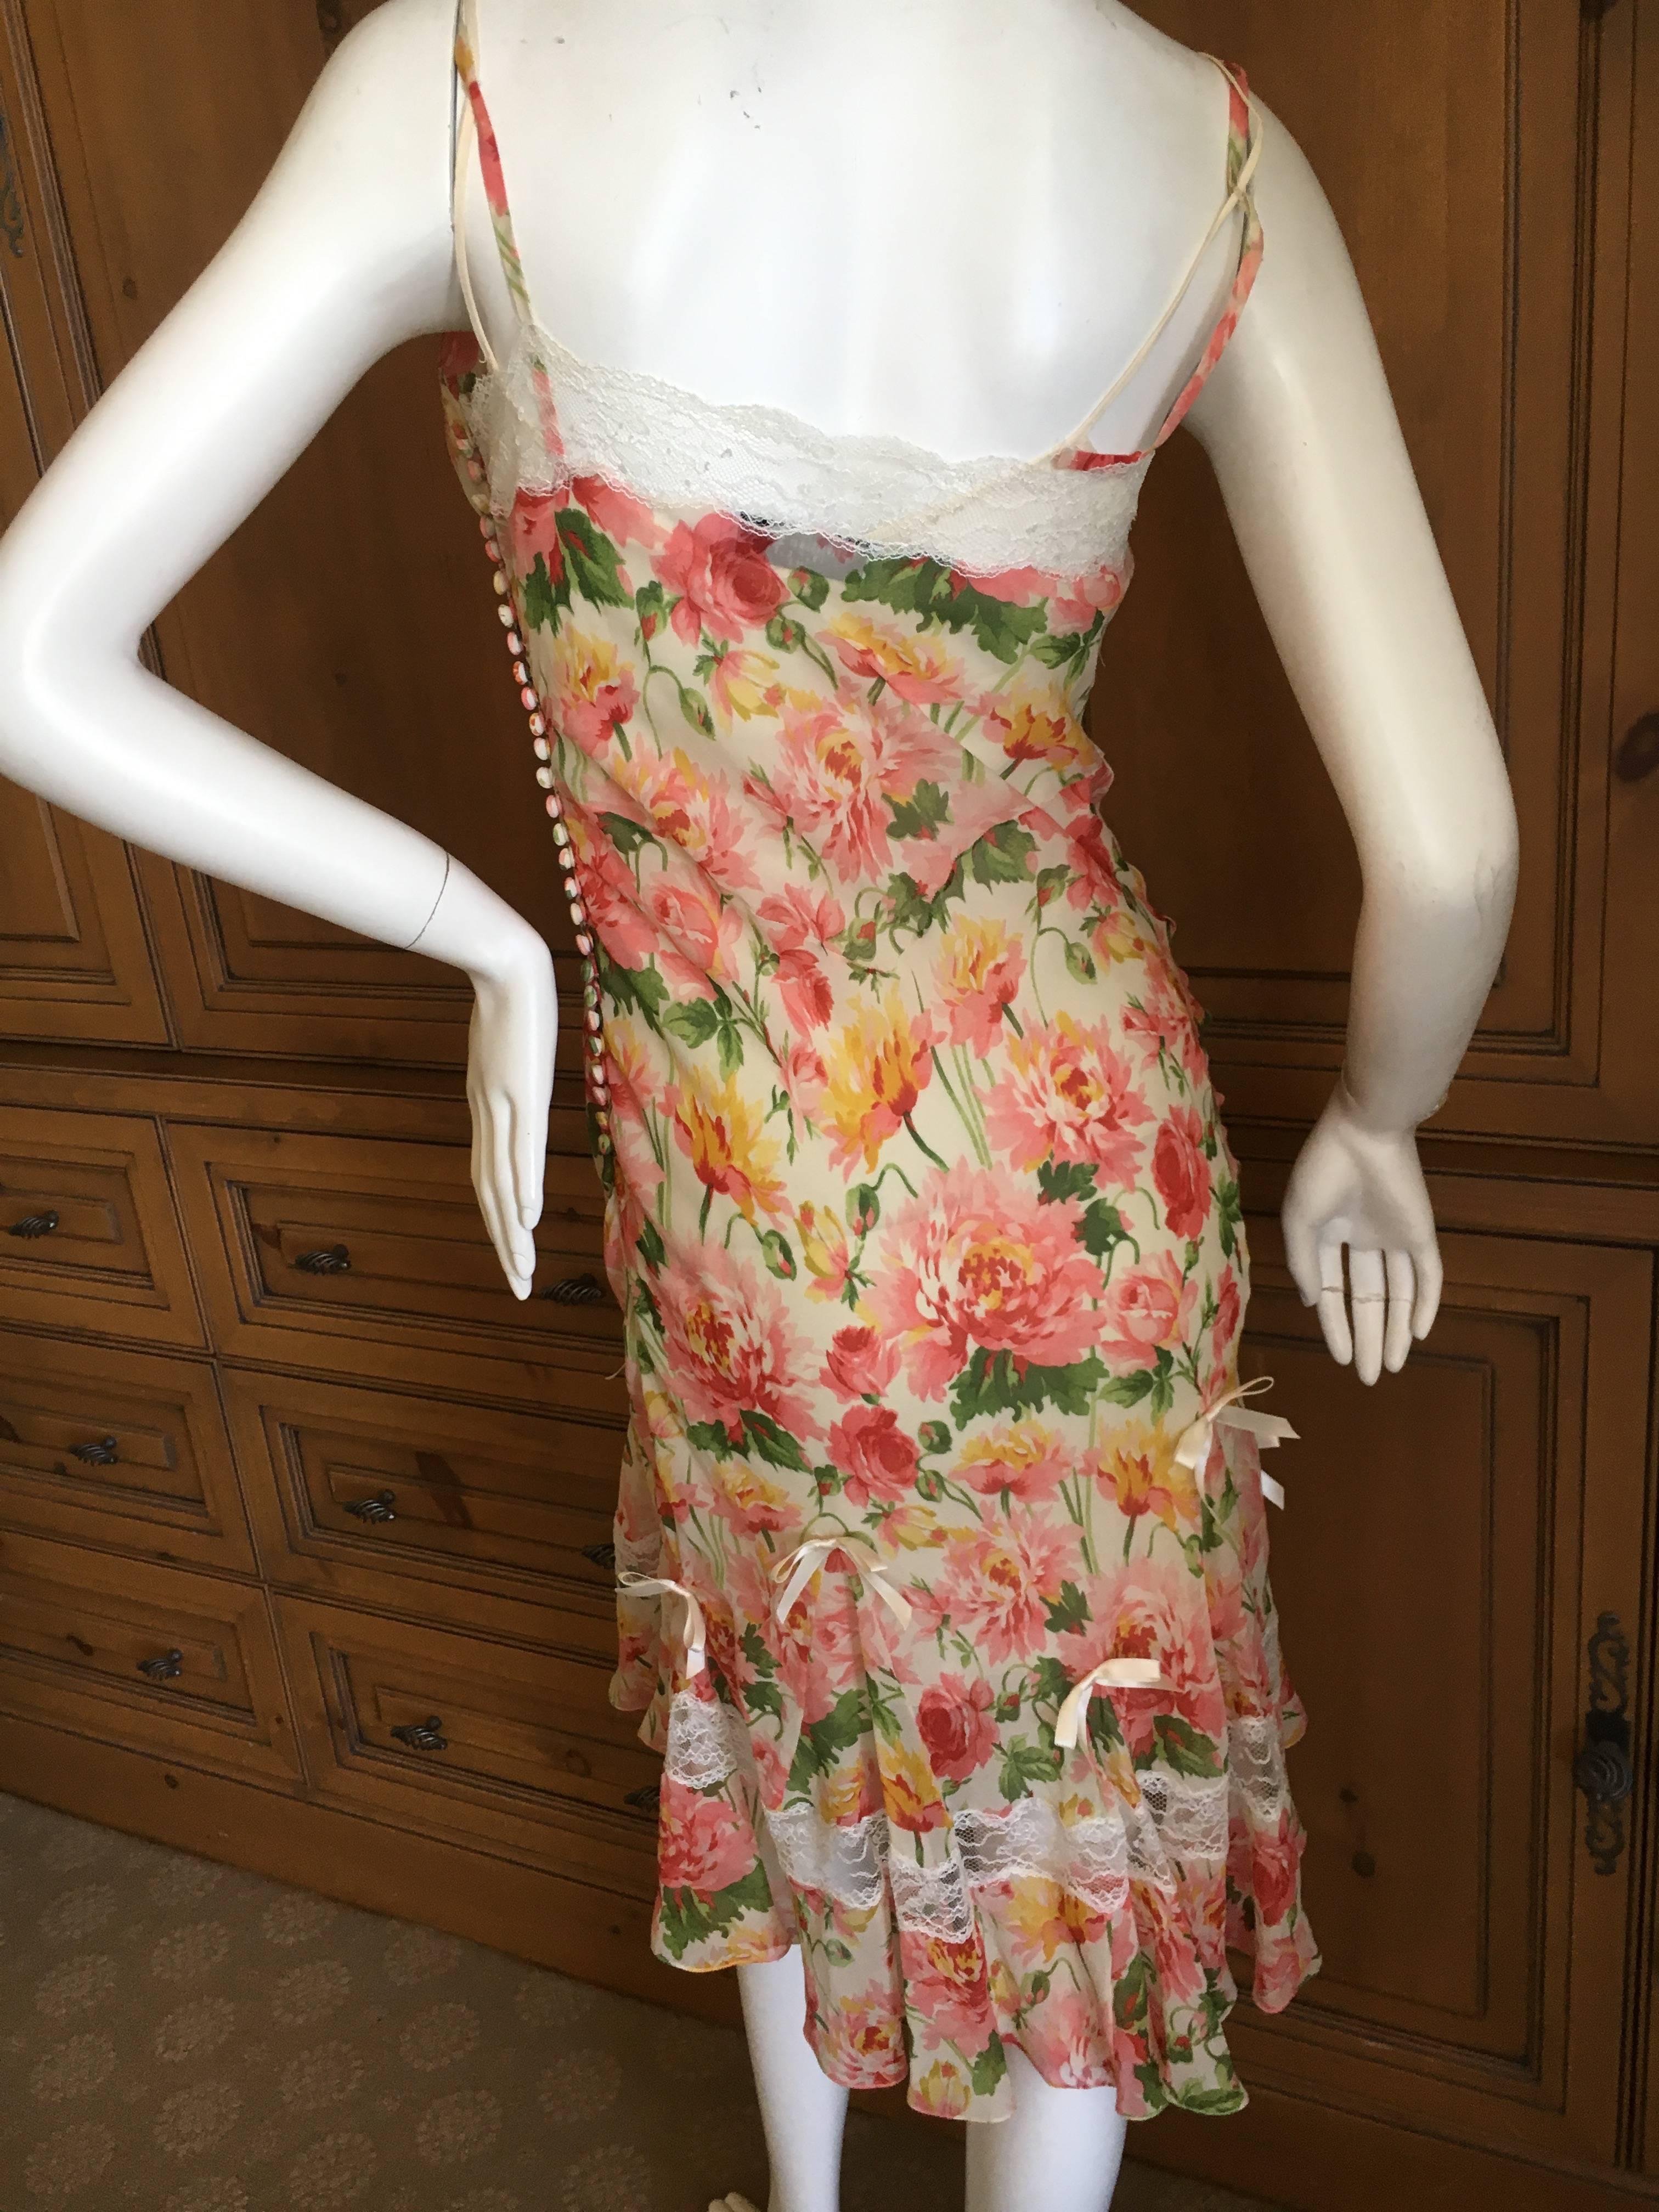 Beige Christian Dior by John Galliano Romantic Floral Dress with Sheer Lace Inserts 38 For Sale